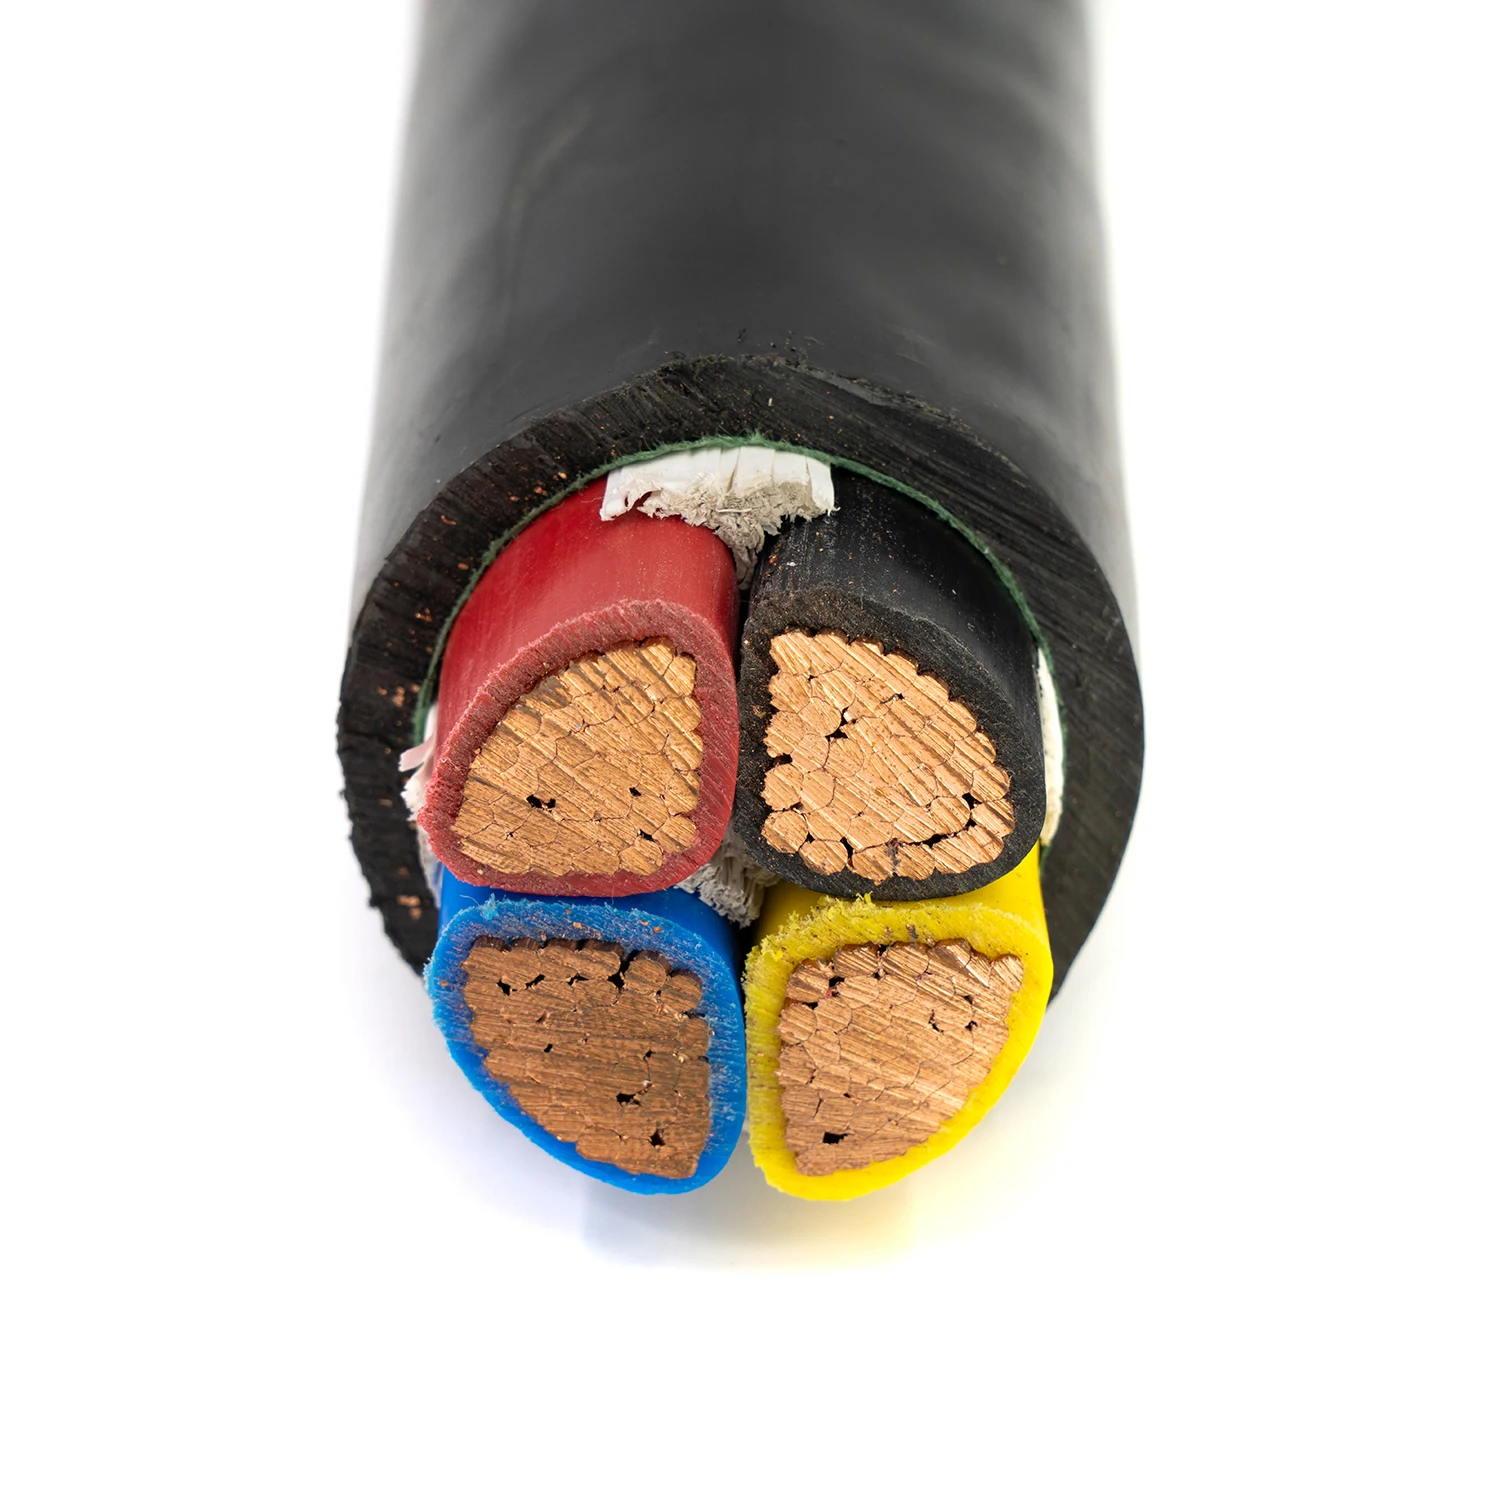 Xv U1000 R2v 5 Phase Cable 400v U1000 Ro2v 5g16 5g25 5g35 Buy Xv U1000 R2v 5 Phase Cable 400v U1000 Ro2v 5g16 5g25 5g35 U1000 R2v Cable U1000 R02v Power Cable 1 240mm2 U 1000